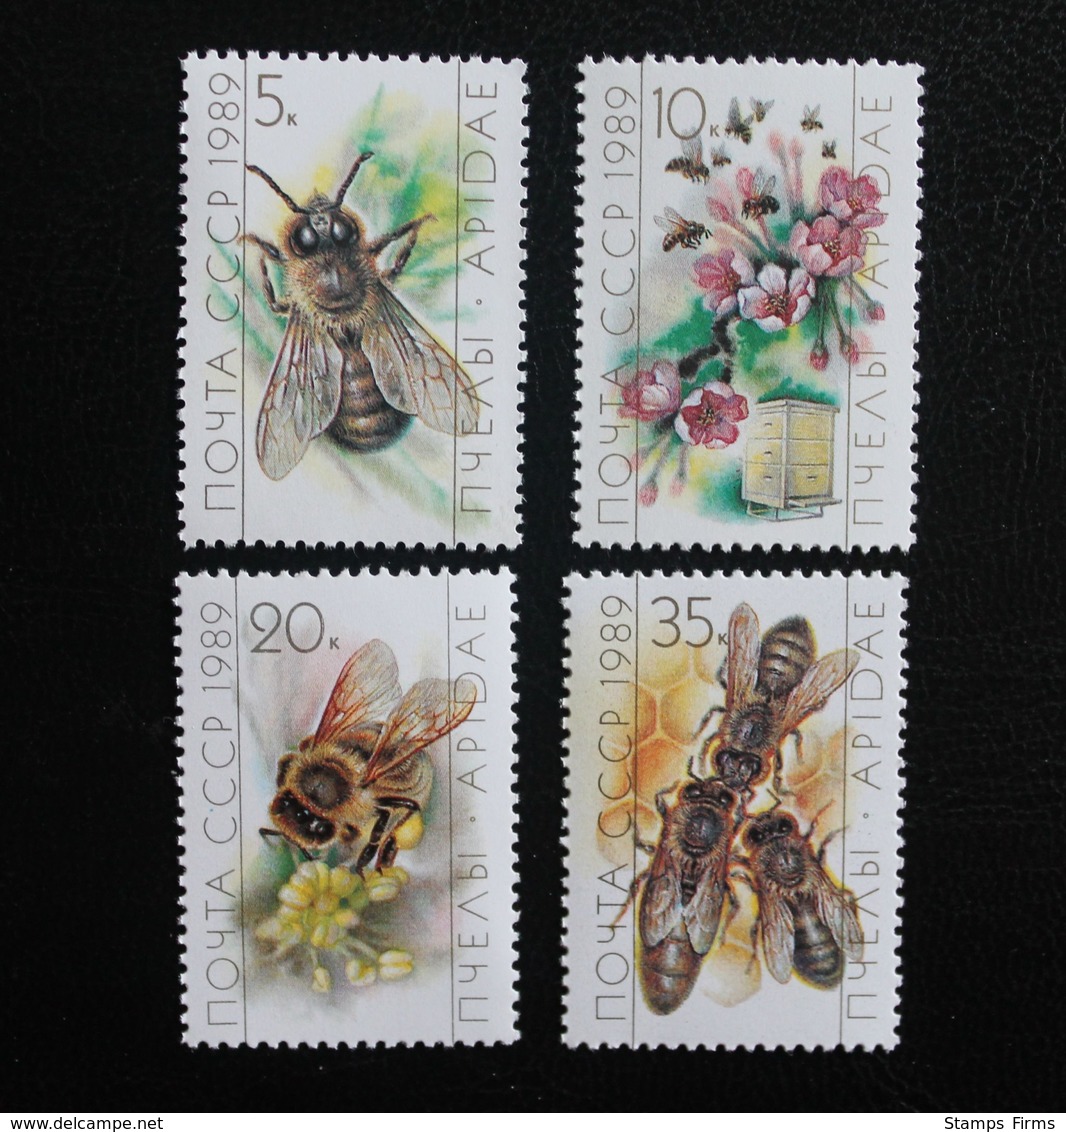 USSR. 1989. Fauna. Insects - Honeybees